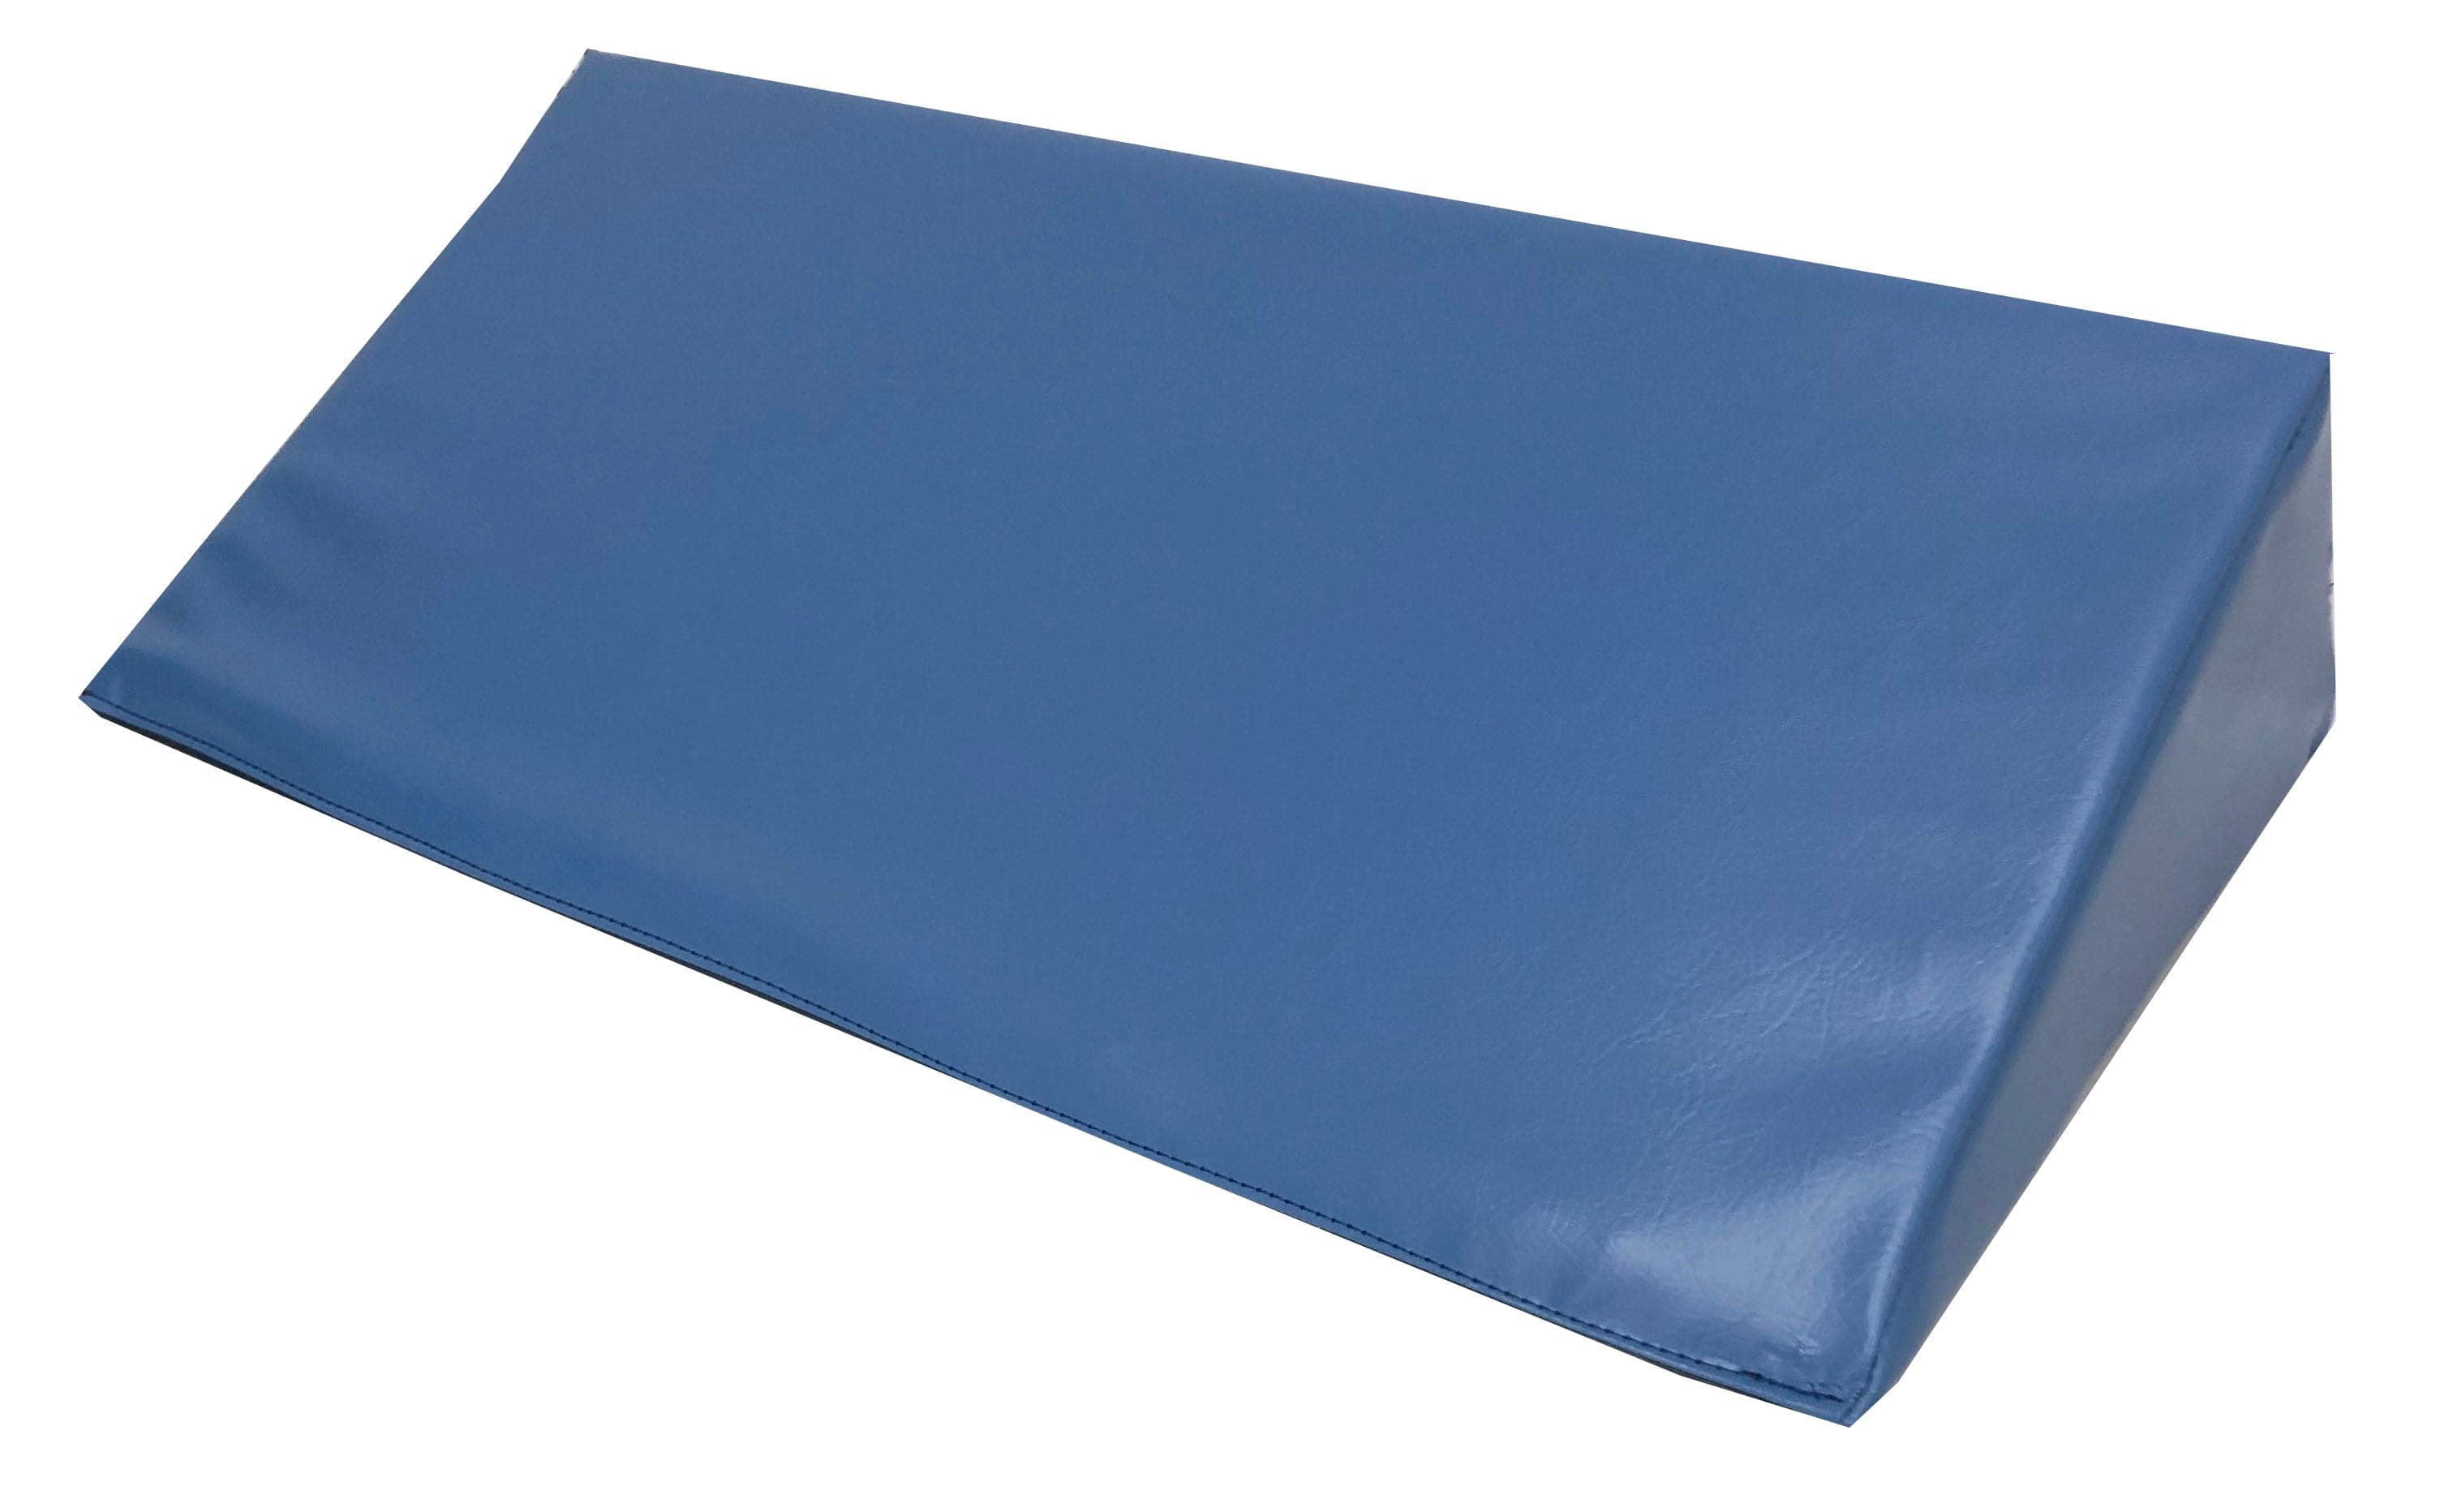 SkilCare Bed Positioning Vinyl Positioning / No / 24" SkilCare 45-Degree 17"L Positioning Wedge w/LSII Cover